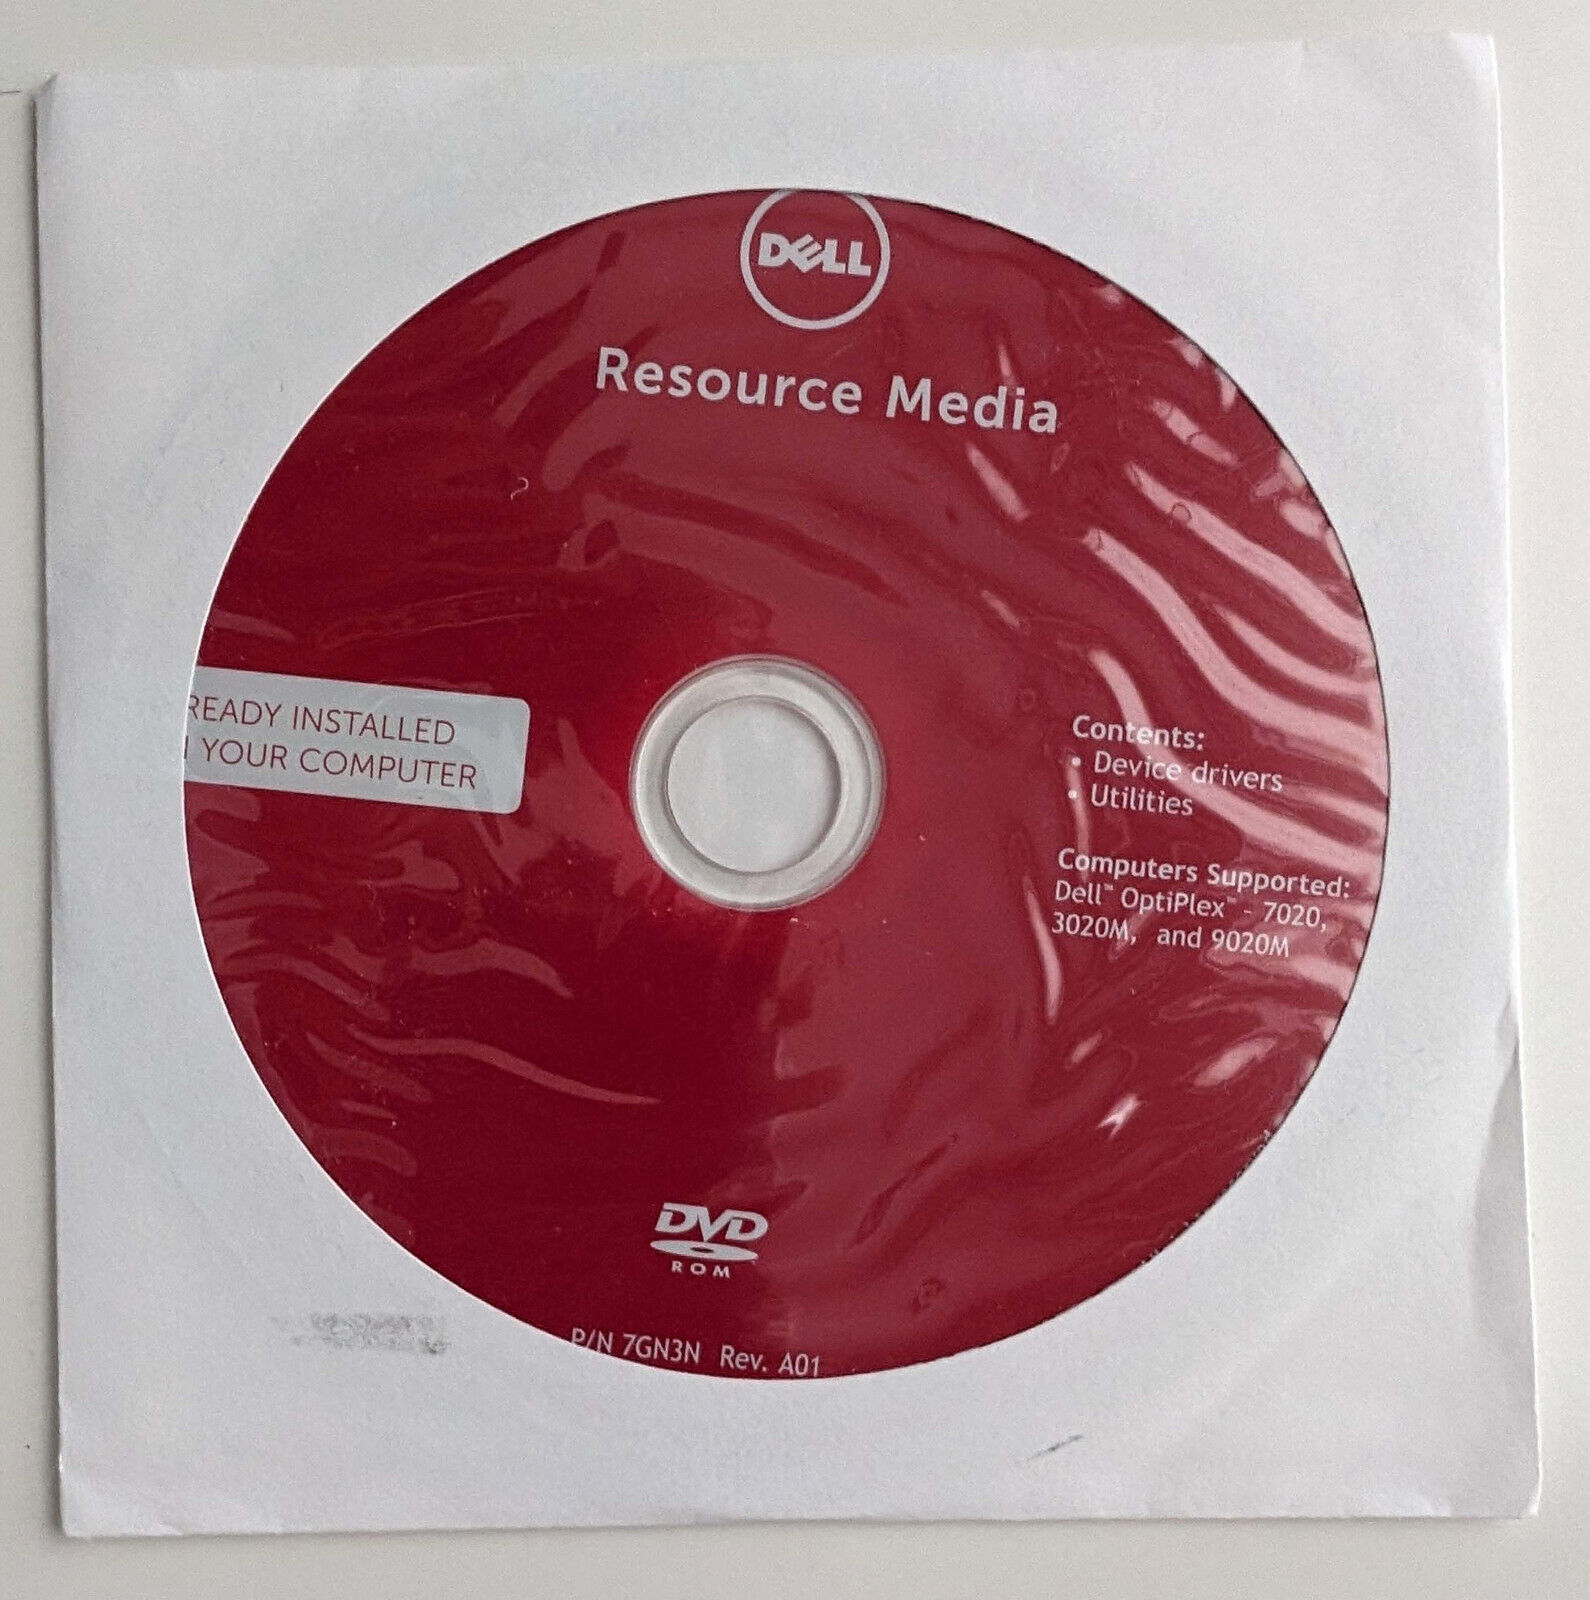 Dell Operating System Windows 8.1 Recovery Media 64 Bit DVD Sealed Genuine RGH4G